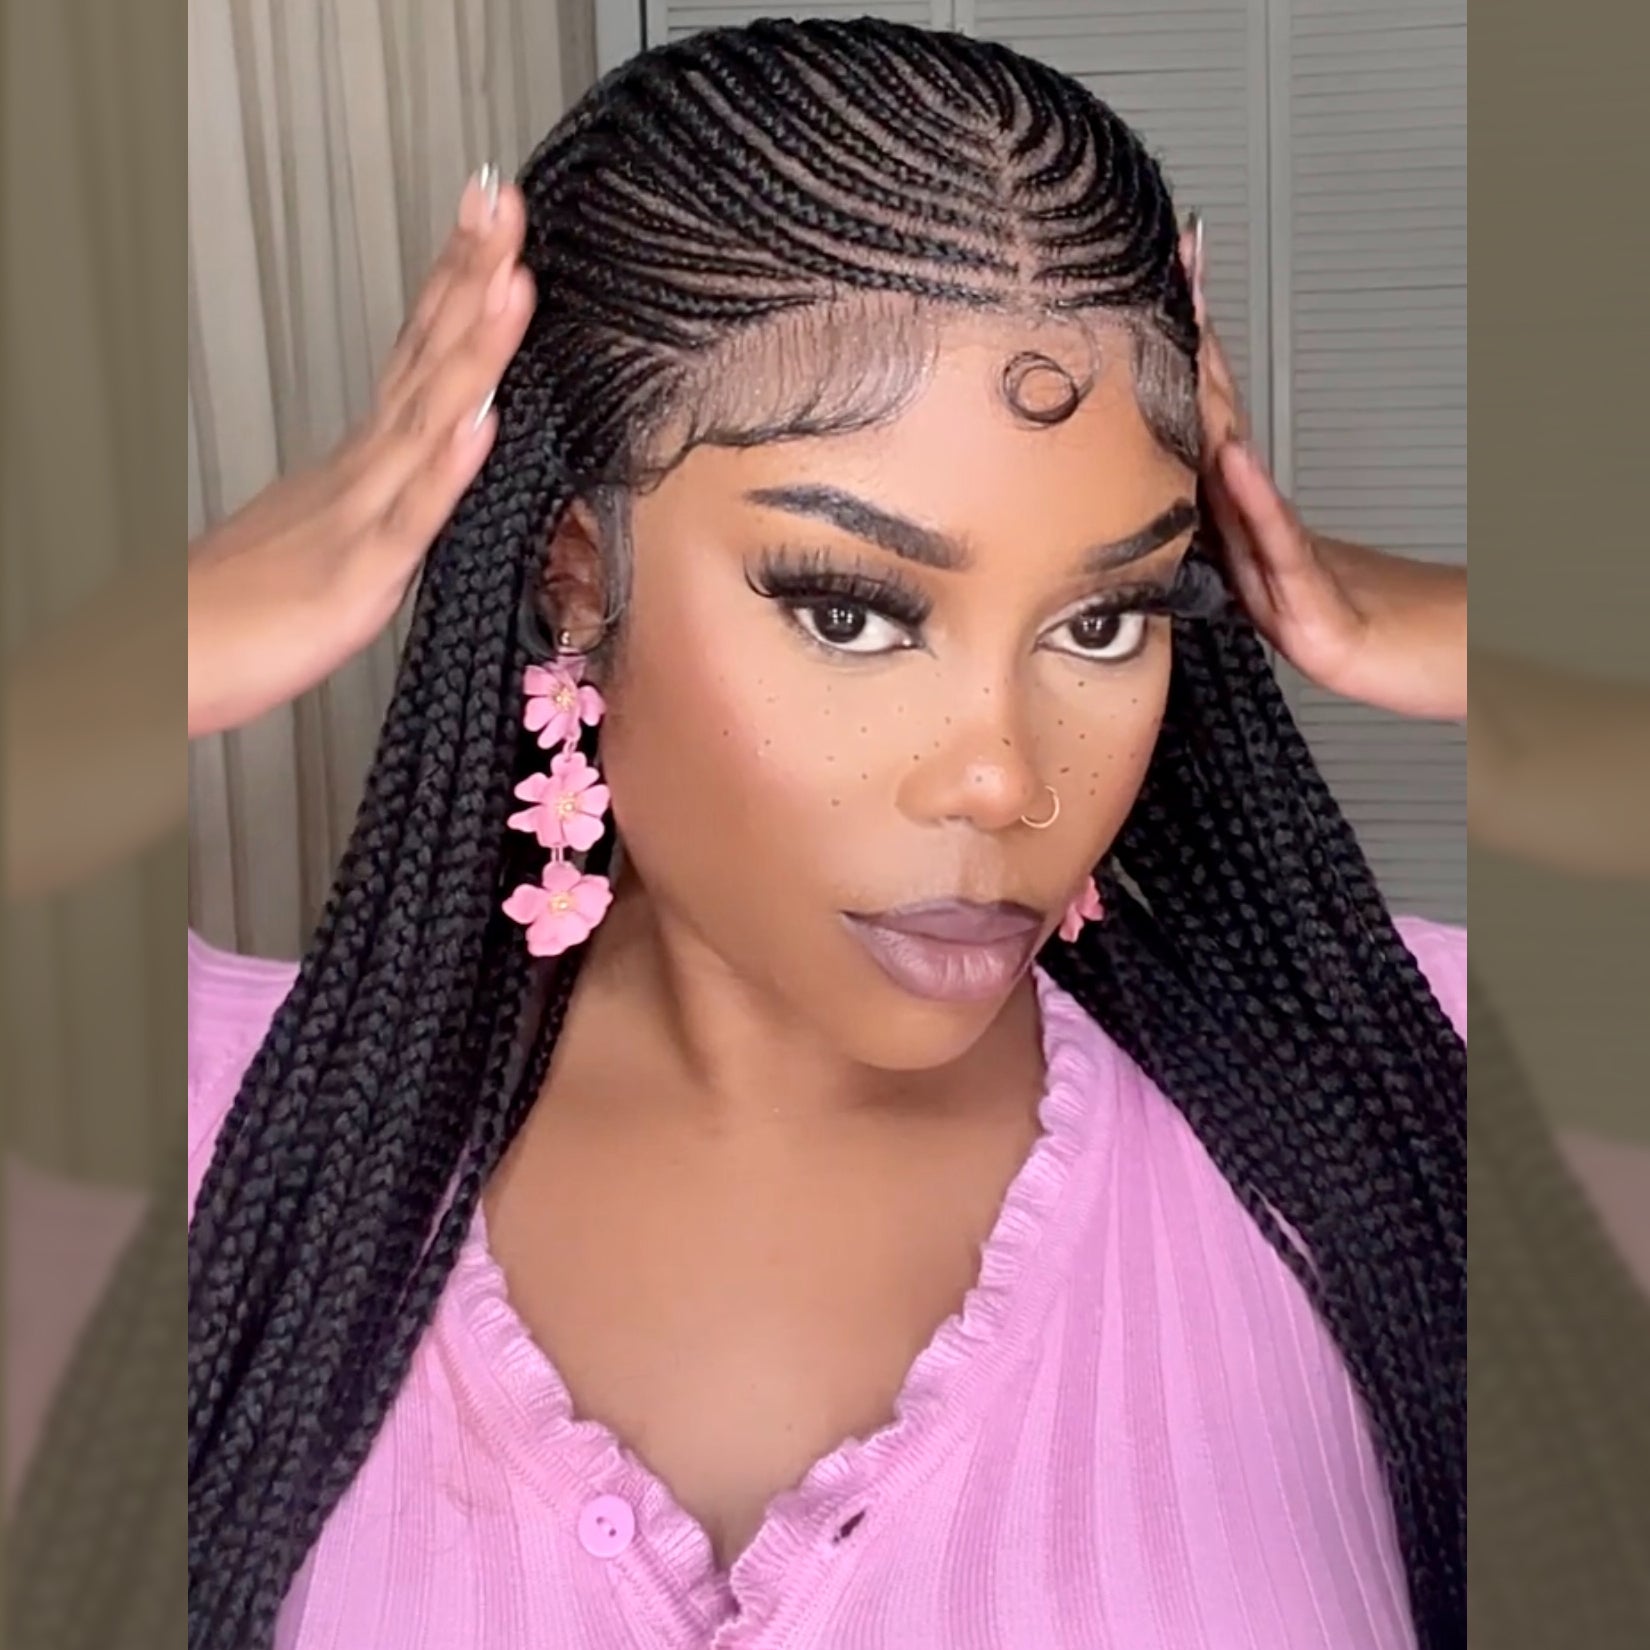 Tedhair 30 Inches 13x7 Fulani Braided Neat Braids Lace Front Wigs 200% Density-100% Handmade